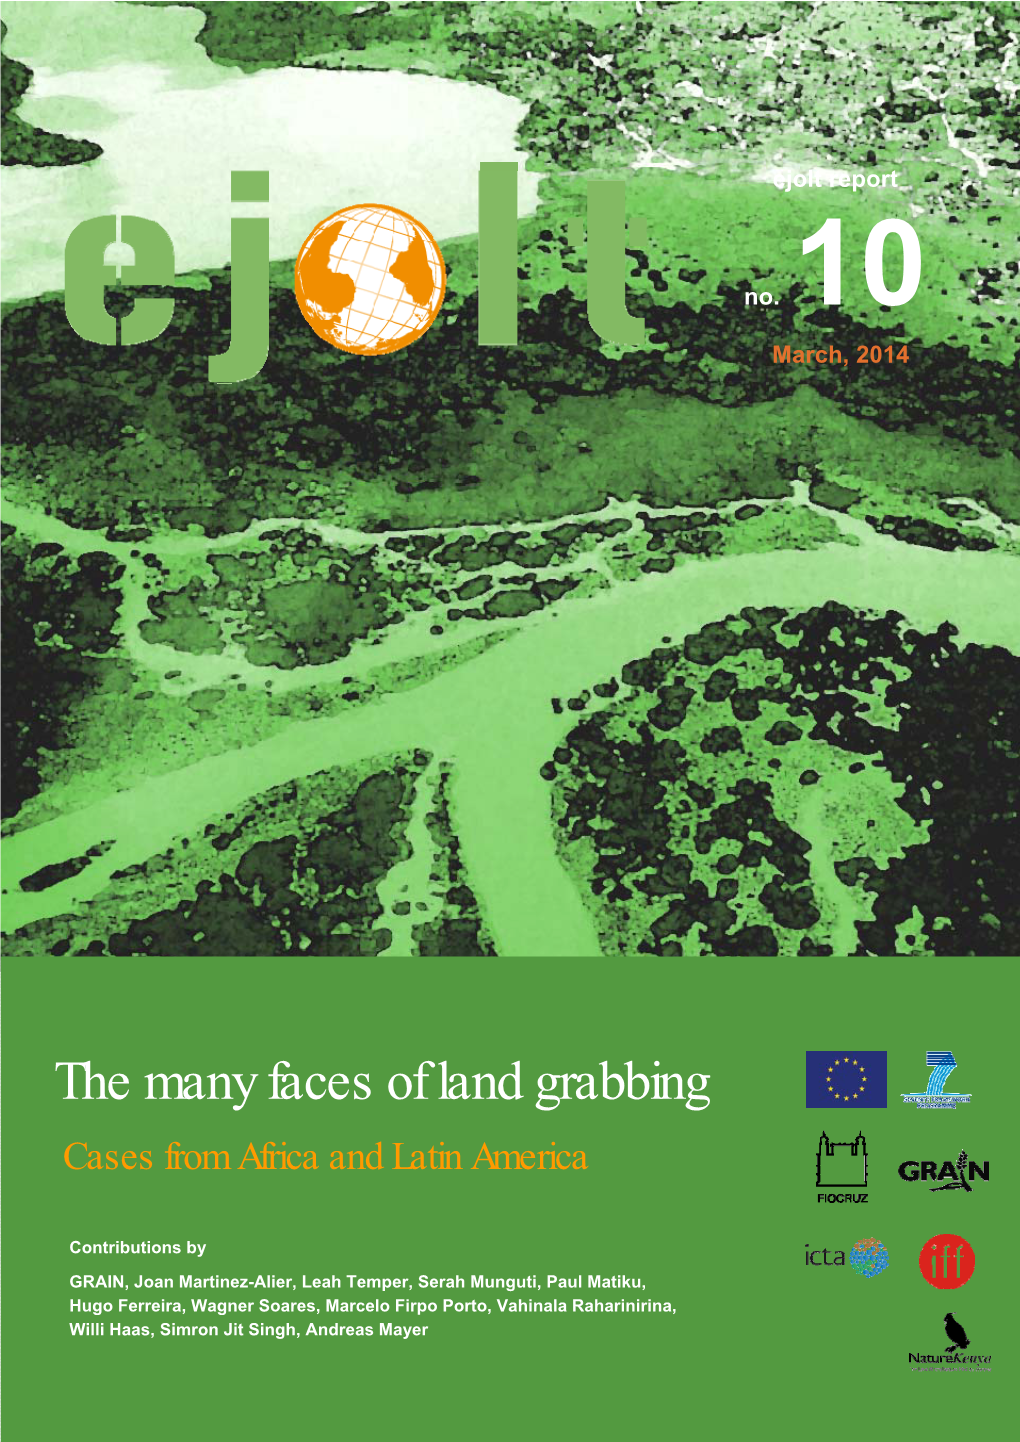 The Many Faces of Land Grabbing - March 2014